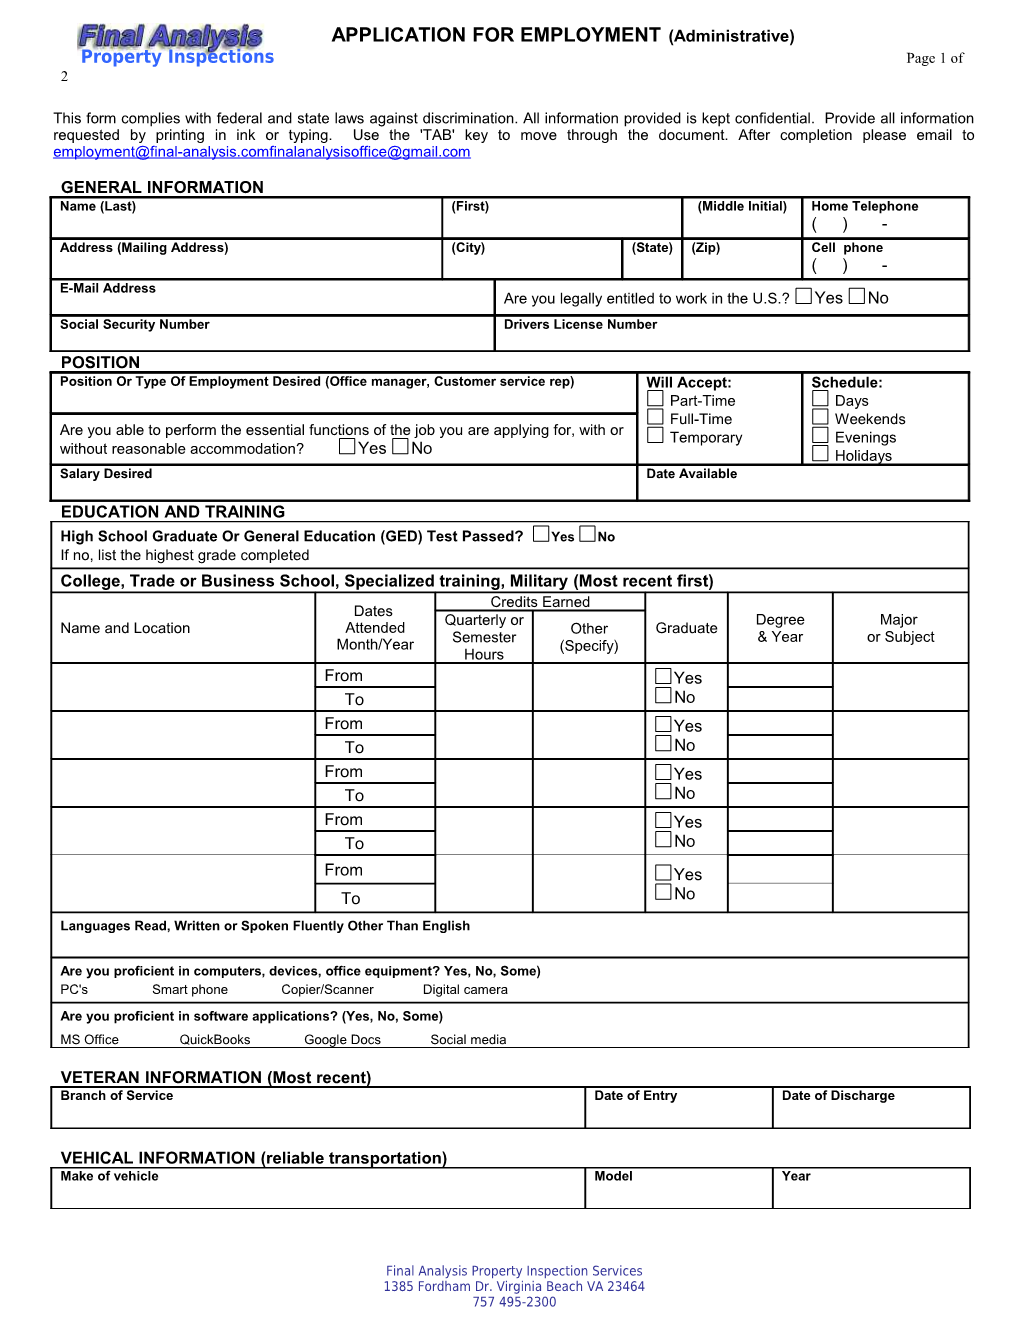 Application for Employment s90